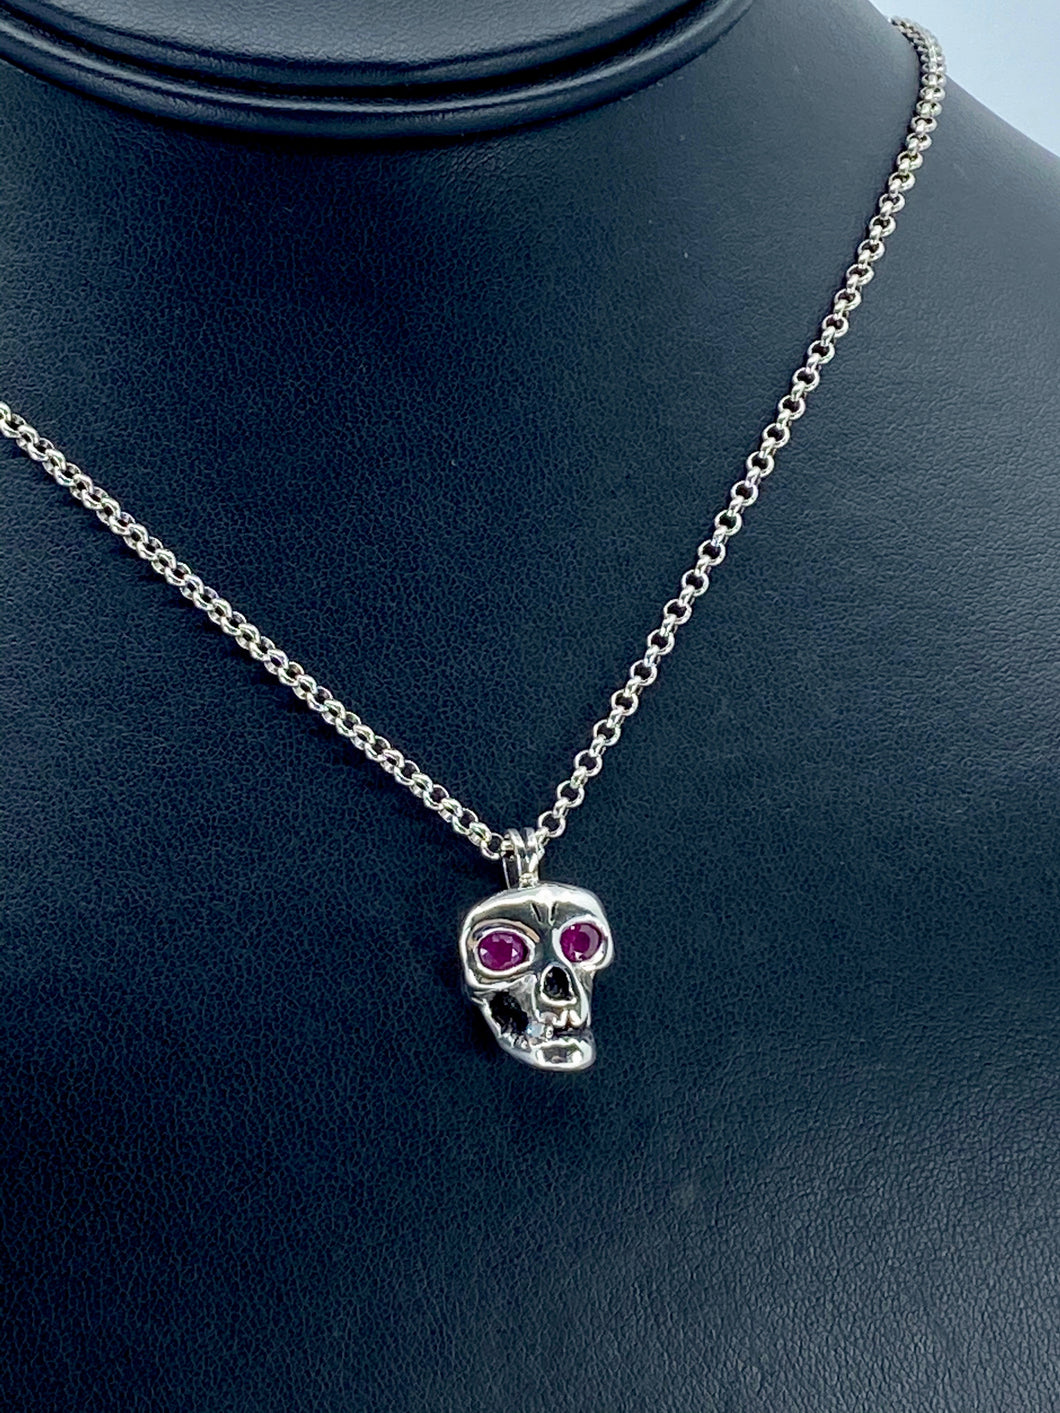 Skull Pendant with Rubies Necklace